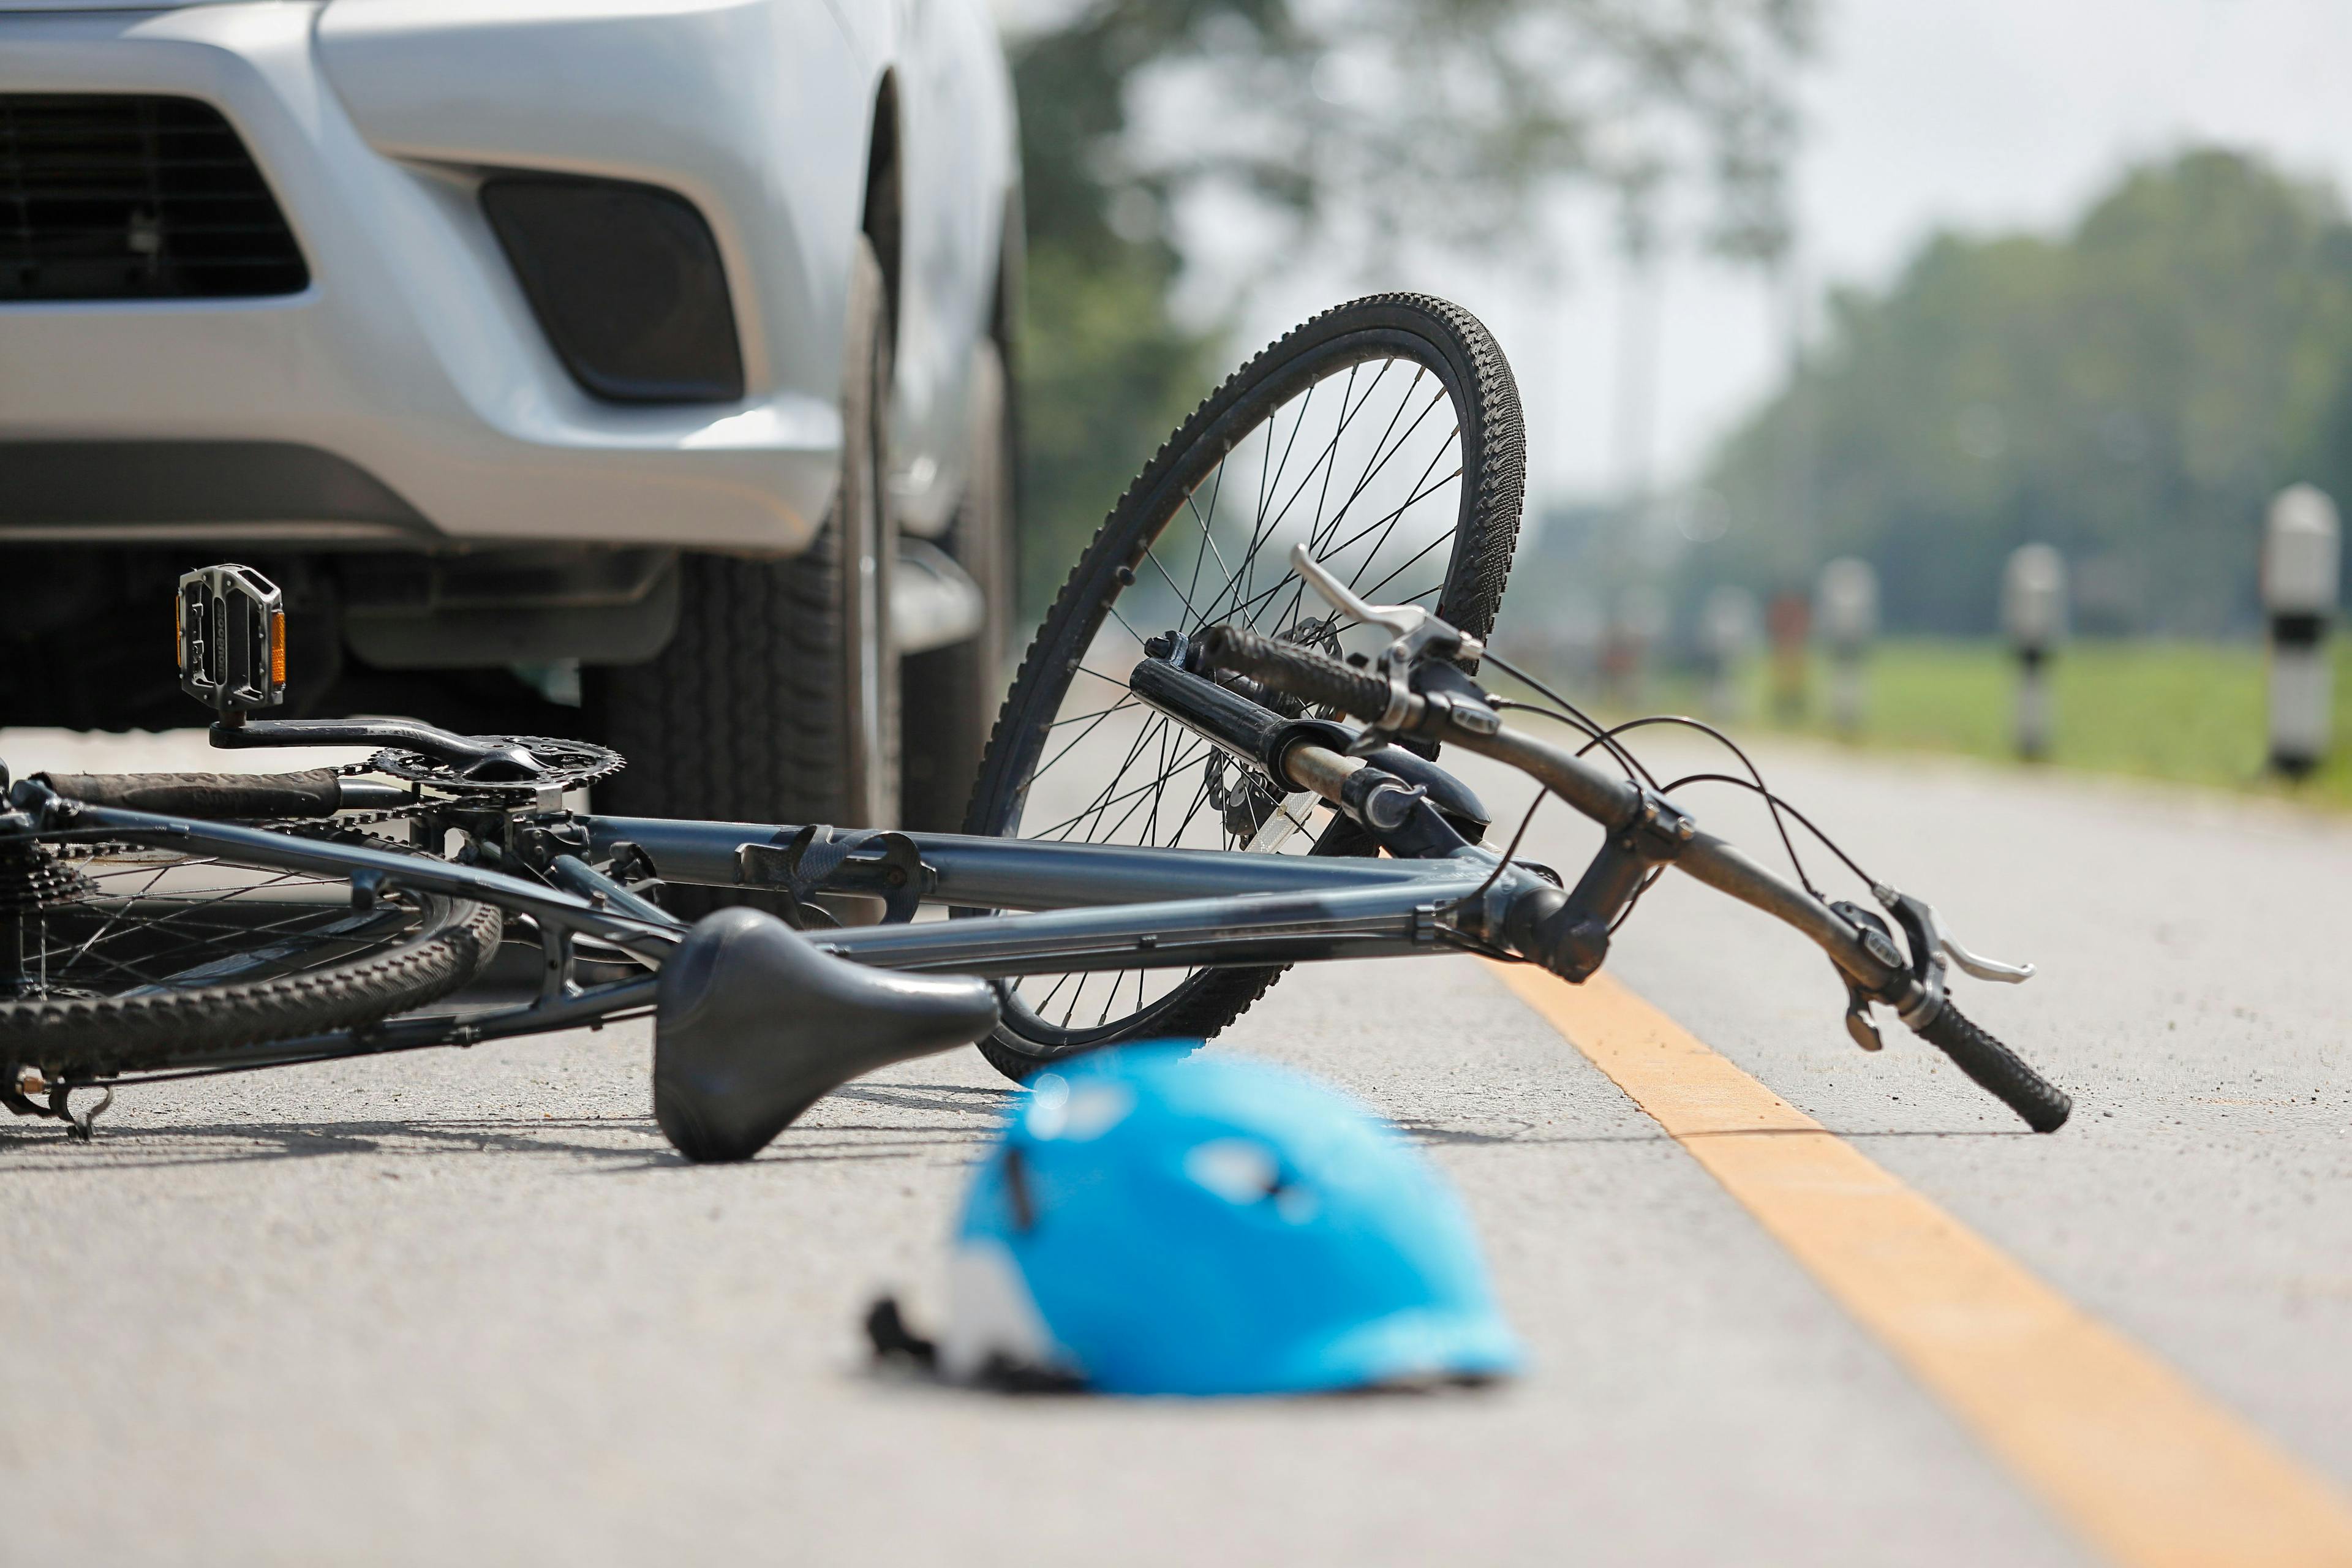 Related to Bicycle Accidents: Road Safety and Legal Rights of Cyclists